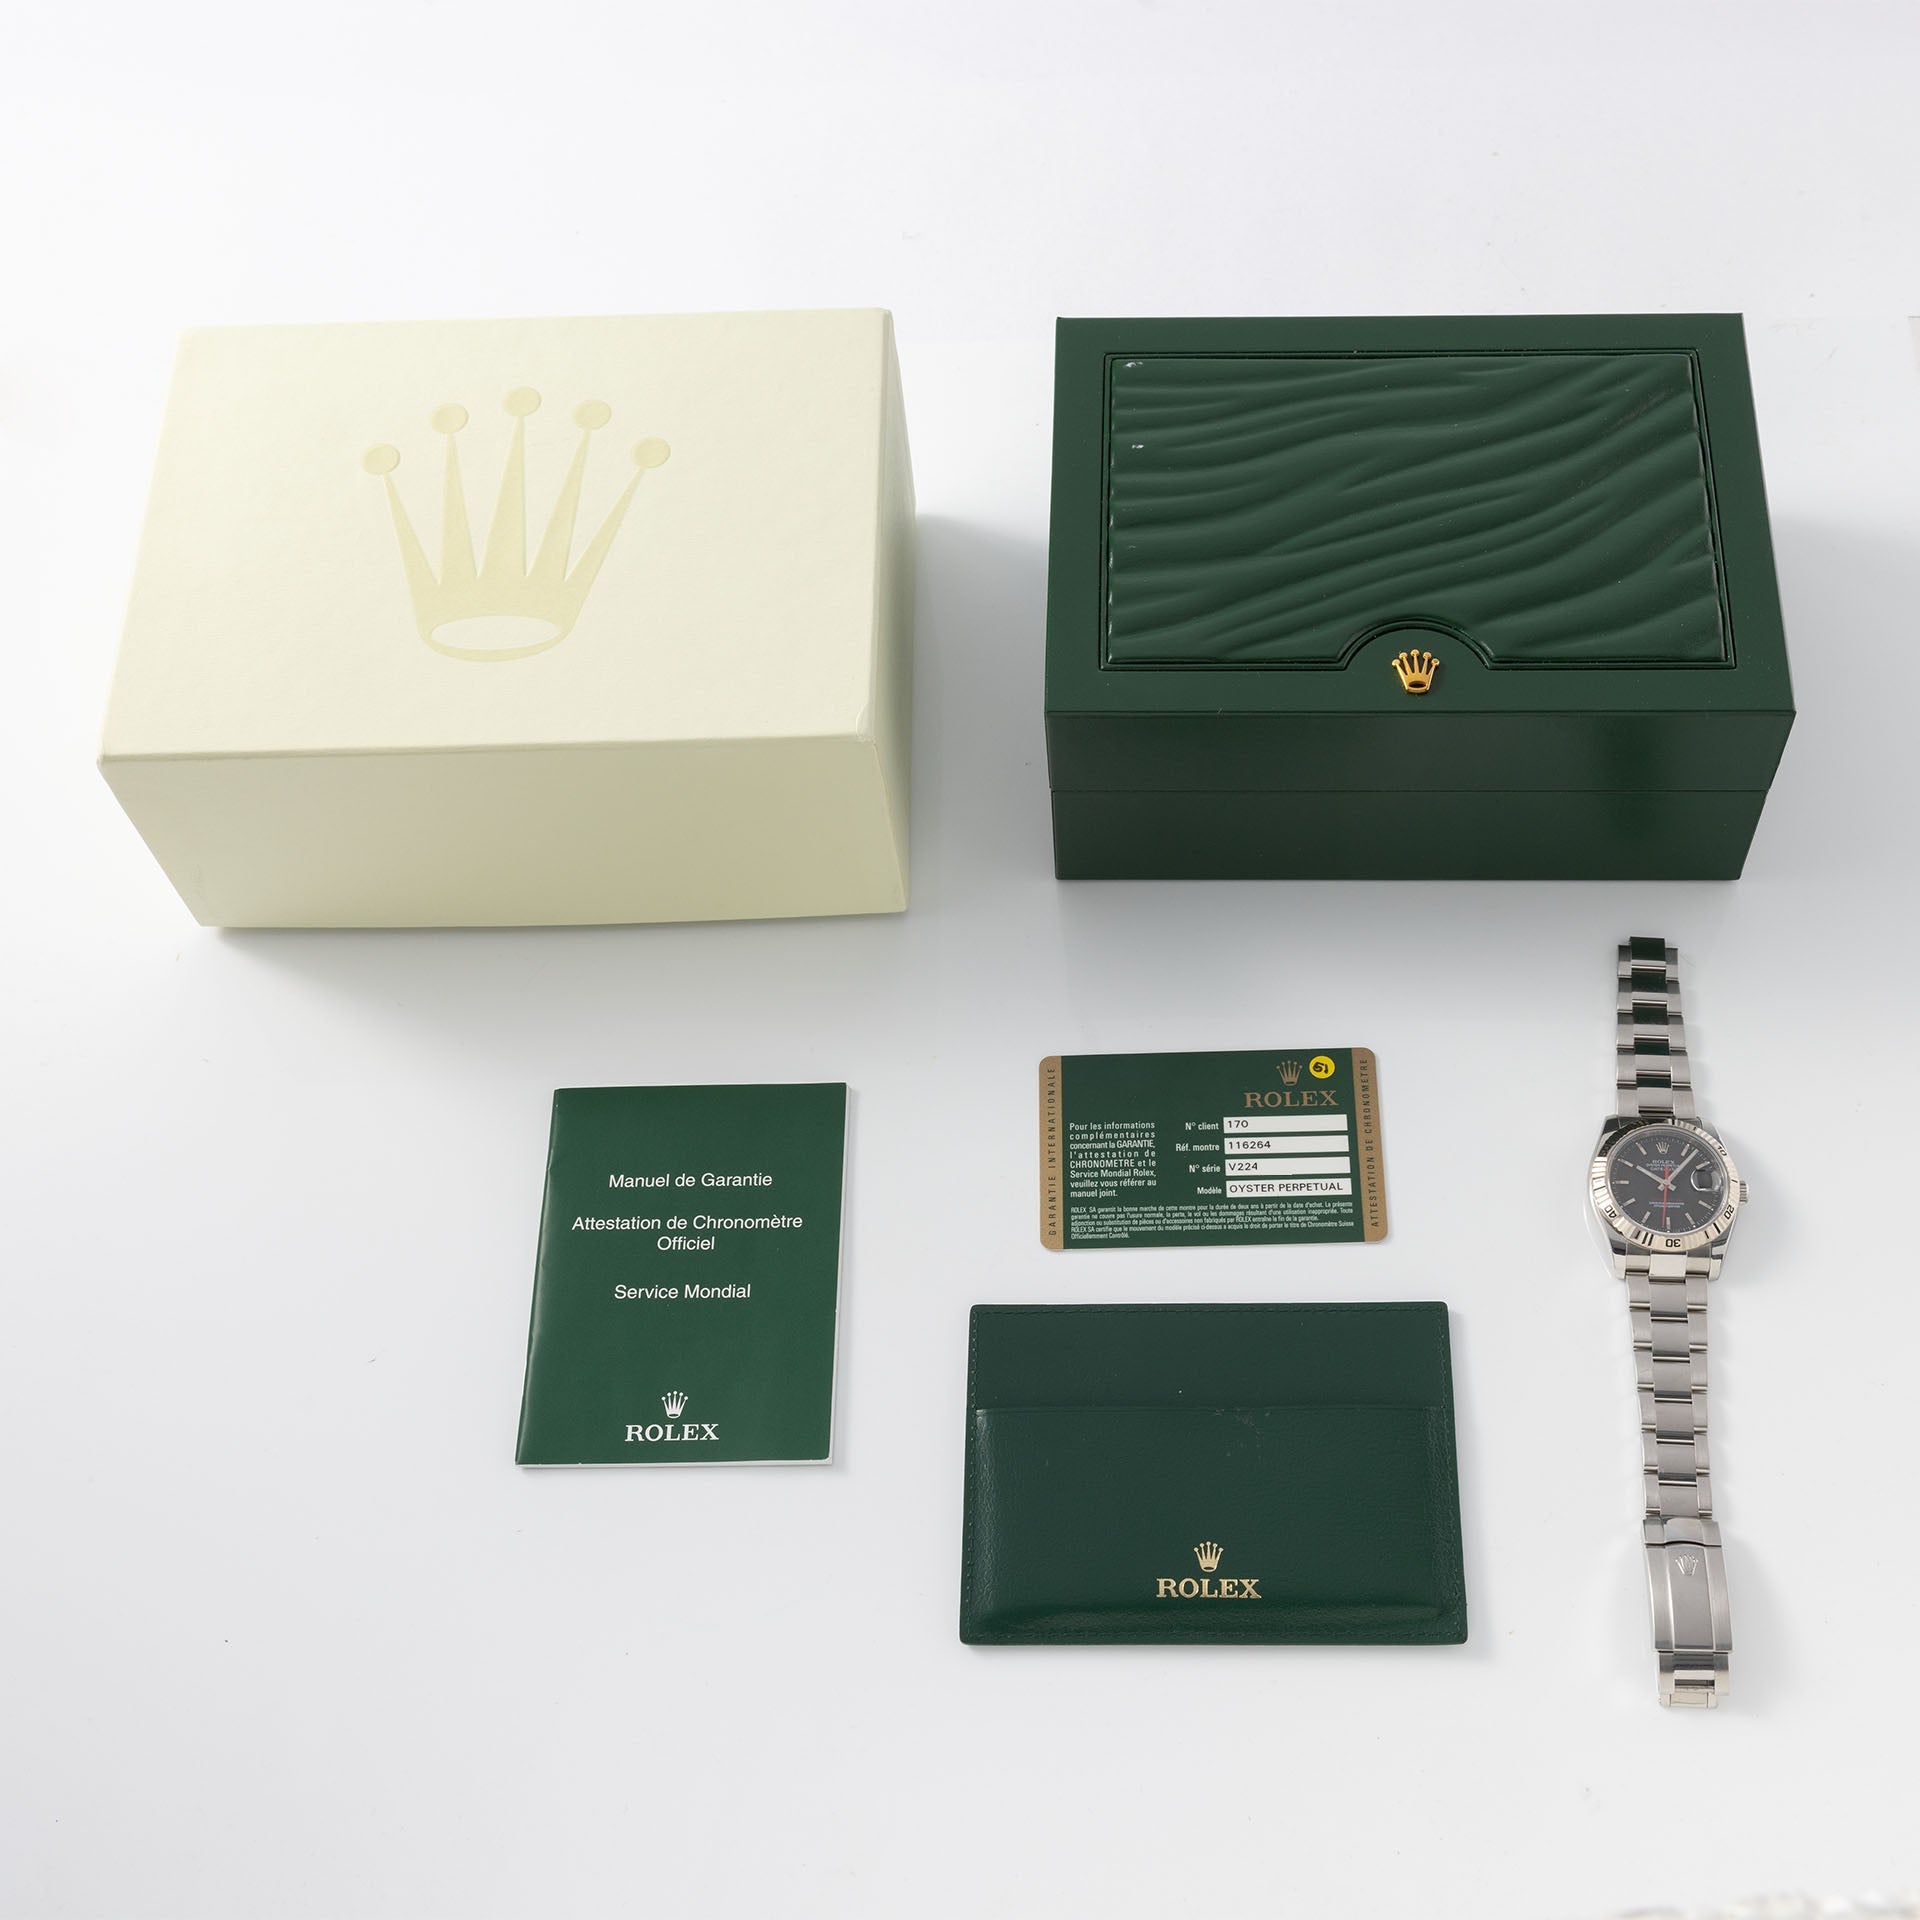 Rolex Datejust 16018 Yellow Gold Champagne Dial W1903